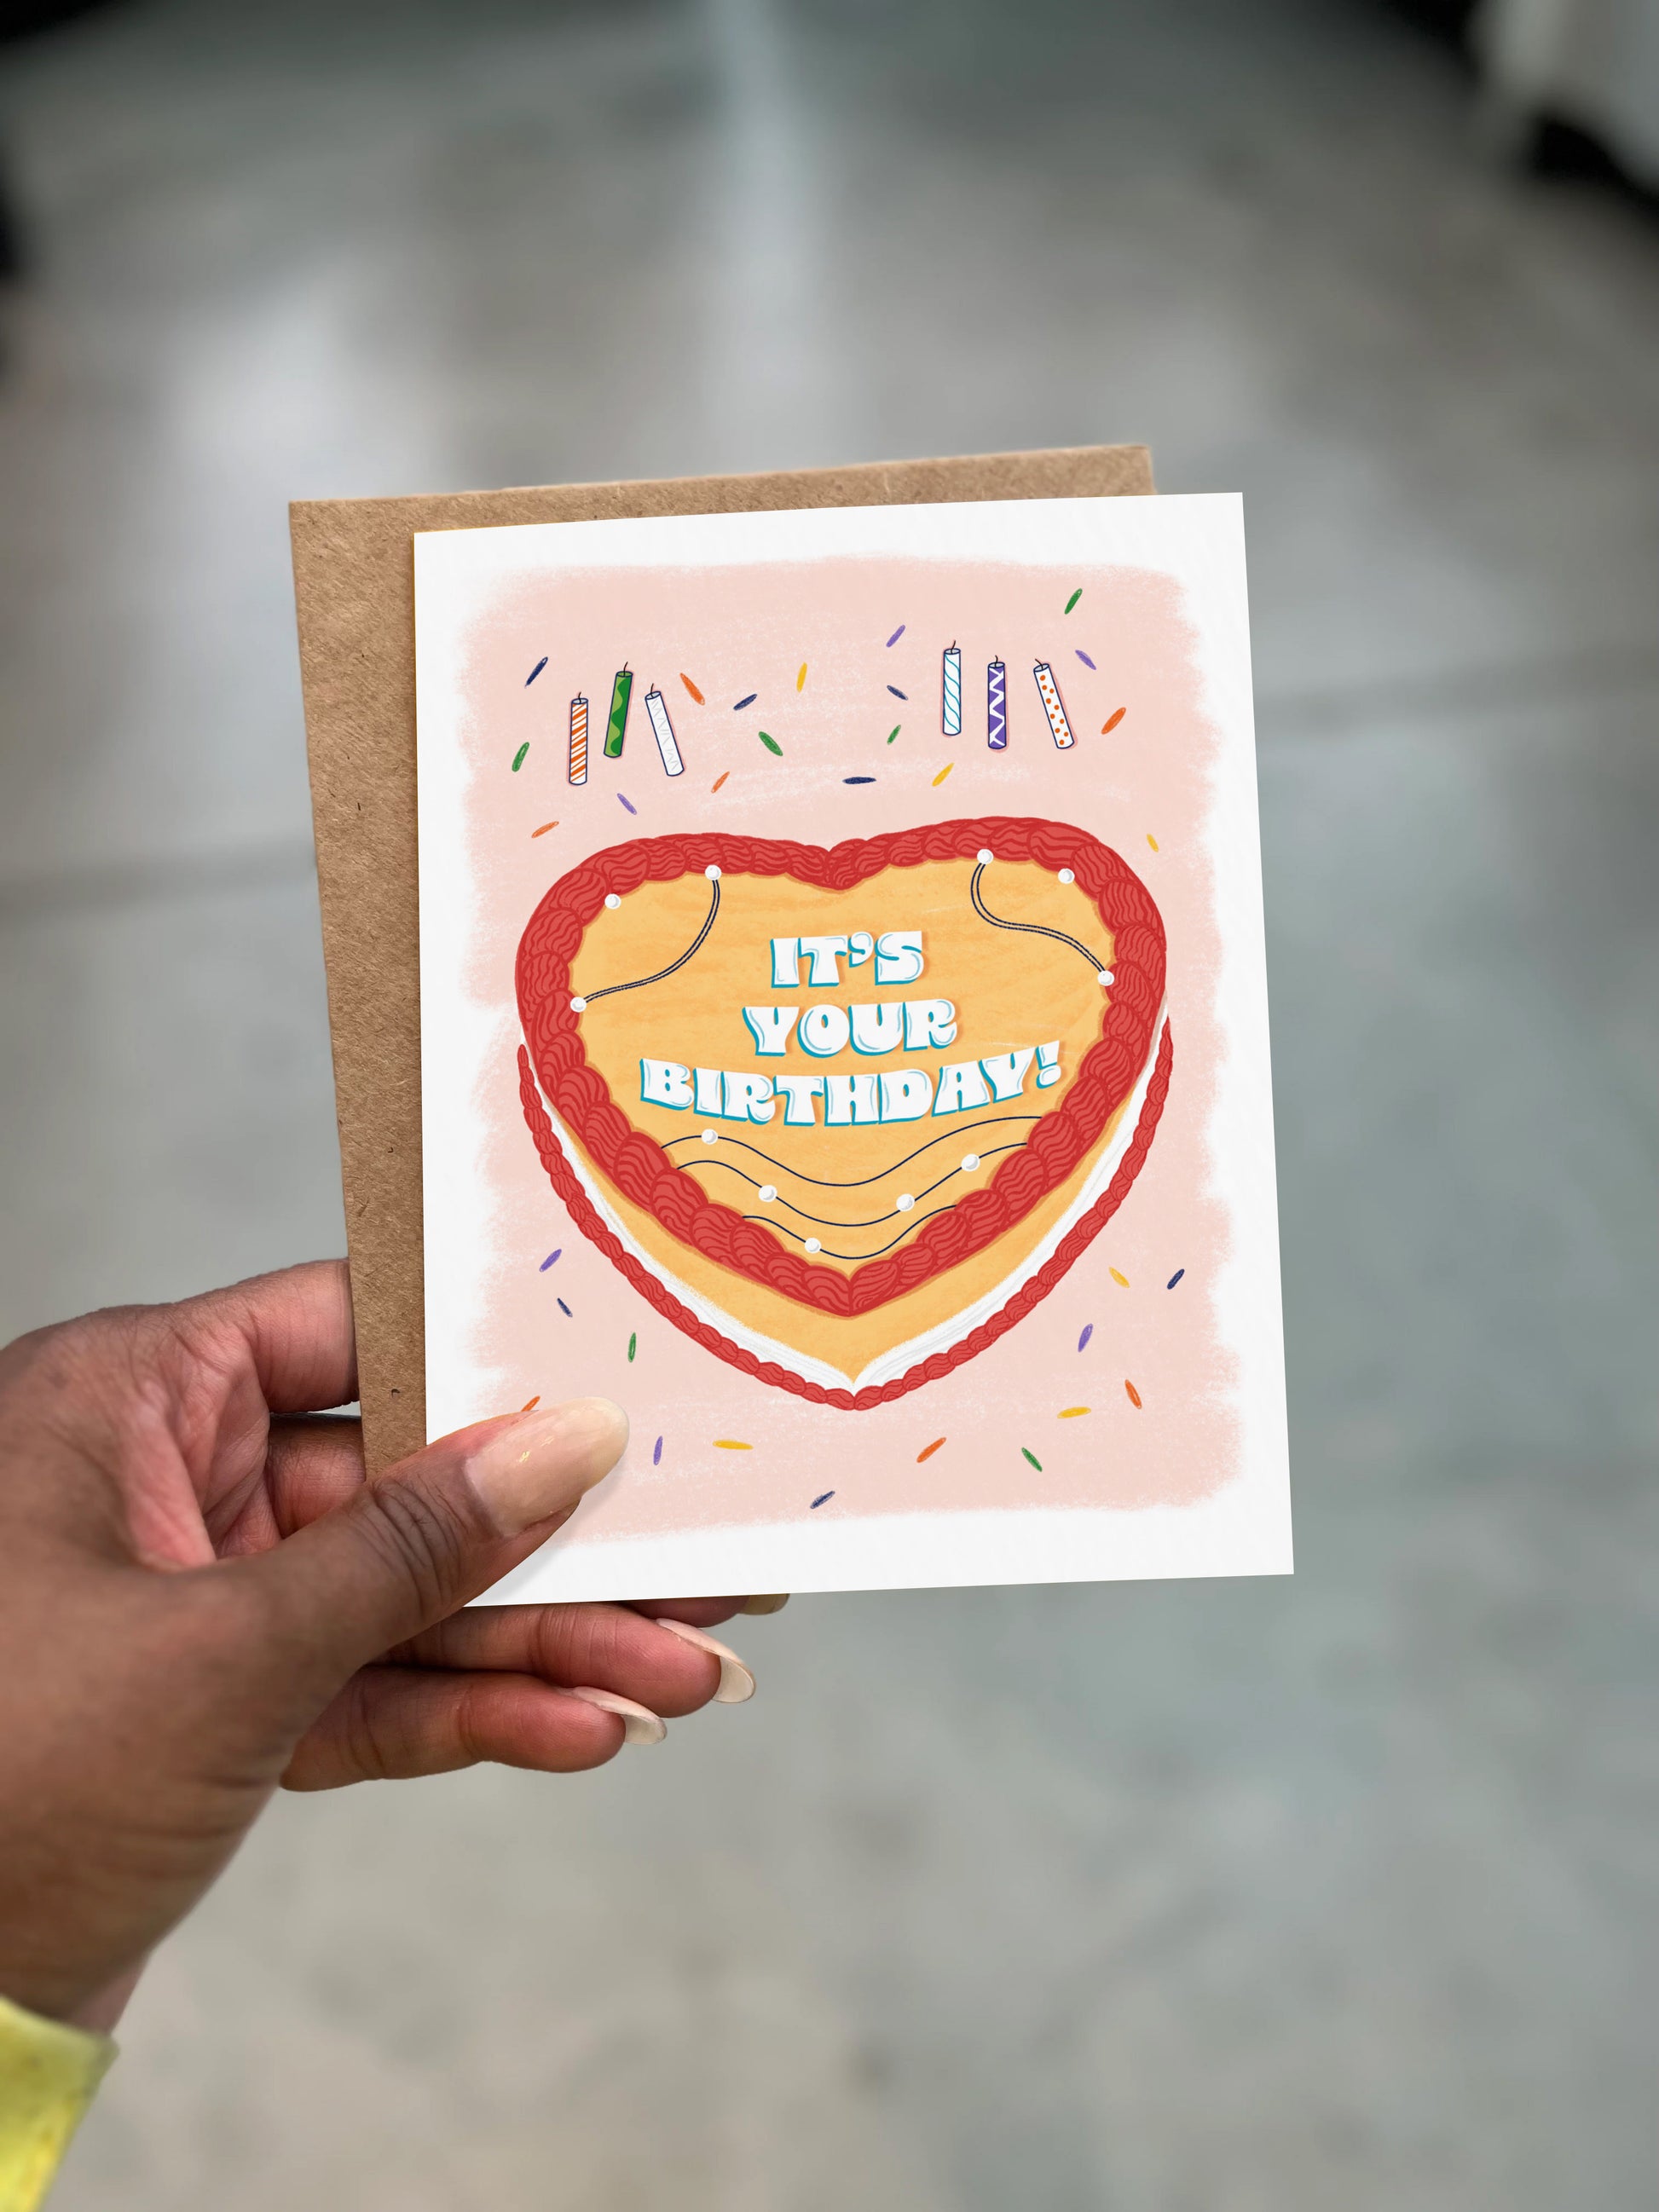 Birthday Cake 4.25x5.5” A2, celebrate, birthday card, vintage heart cake, greeting card from Goods Made By Digitrillnana, Ashley Fletcher. Black Woman Owned. Perfect card for a birthday gift! Eco-friendly recycled cards. 